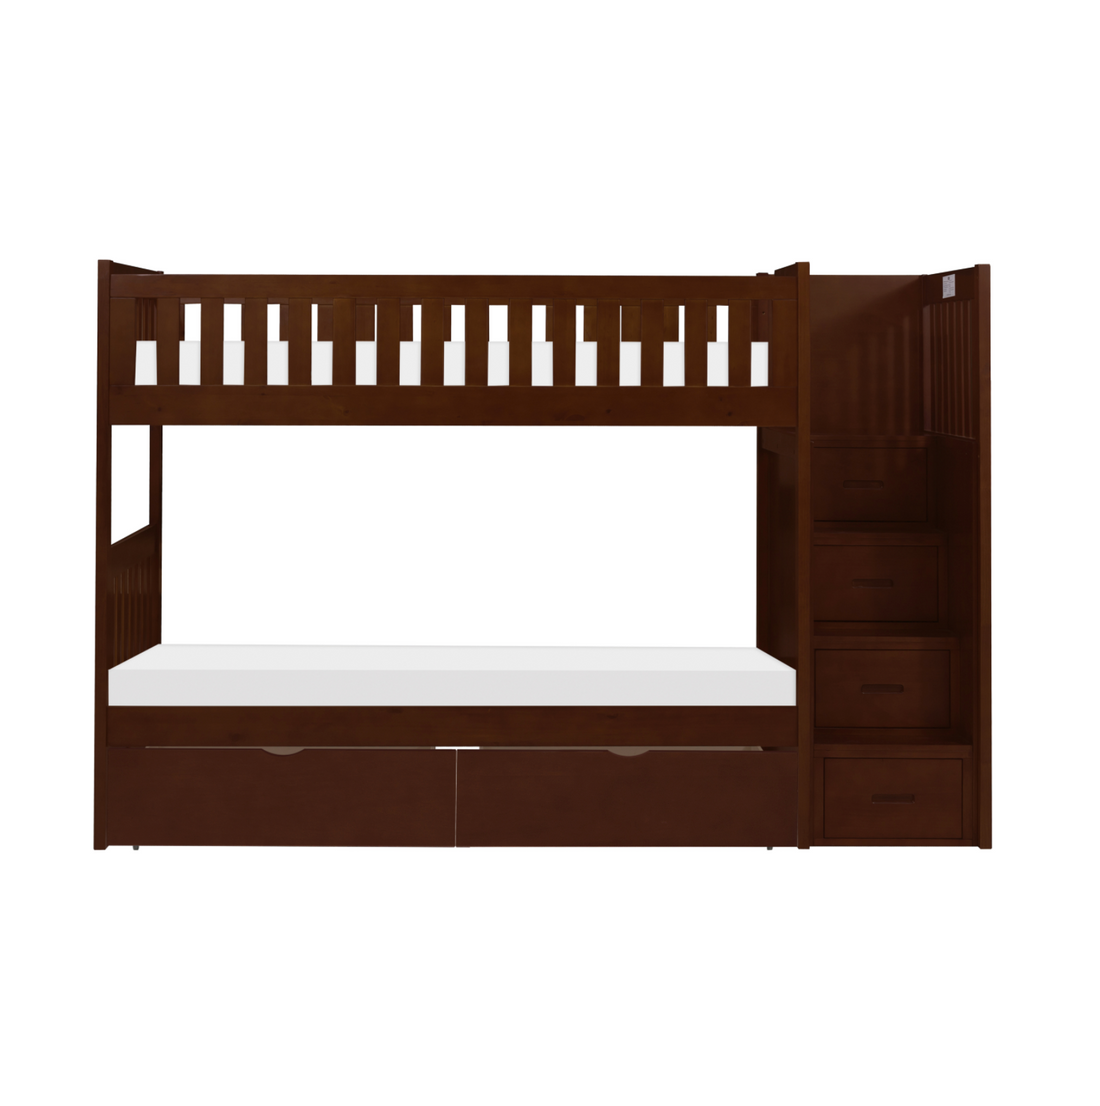 Rowe Dark Cherry Twin/Twin Step Bunk Bed with Storage Boxes - SET | B2013SBDC-1 | B2013SBDC-2 | B2013SBDC-3 | B2013SBDC-SL | B2013DC-T - Bien Home Furniture &amp; Electronics